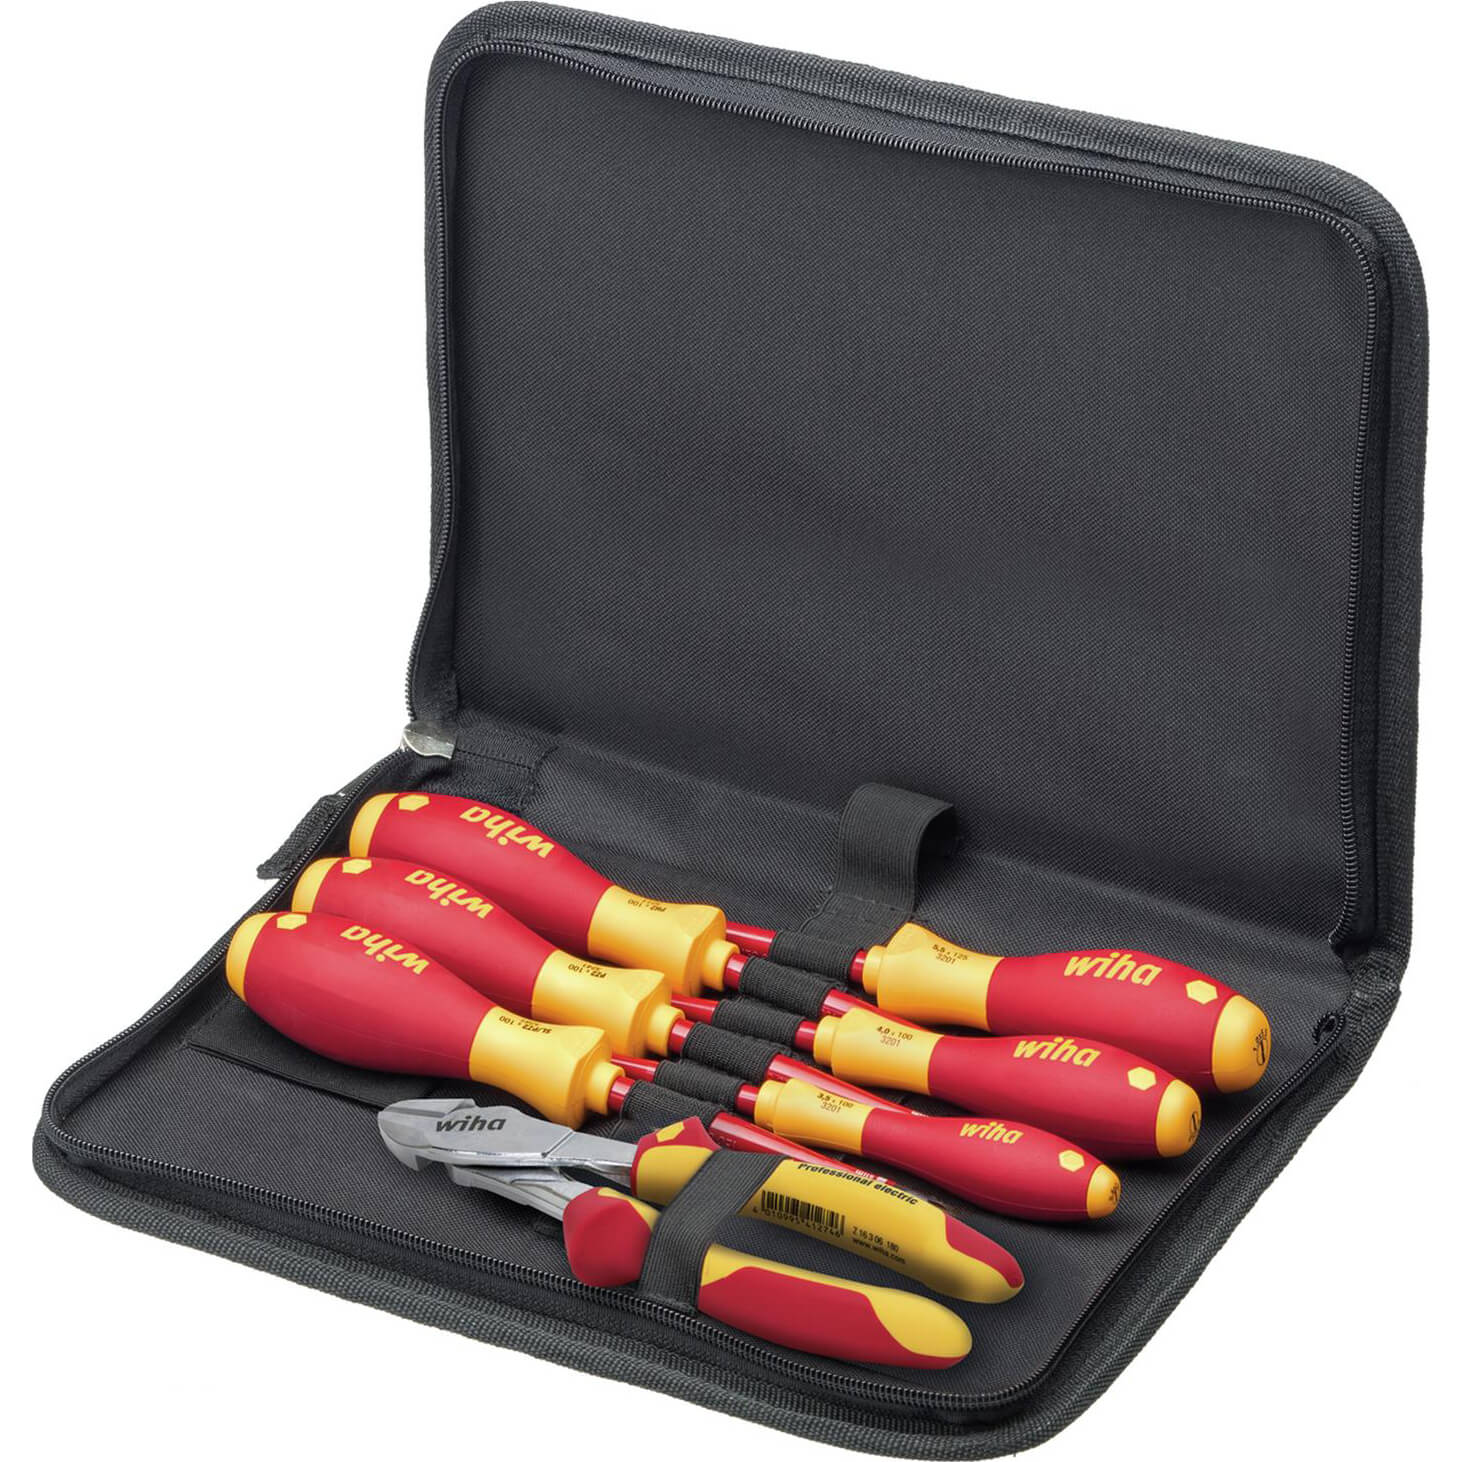 Wiha 7 piece VDE Insulated Screwdriver and Side Cutters Tool Kit